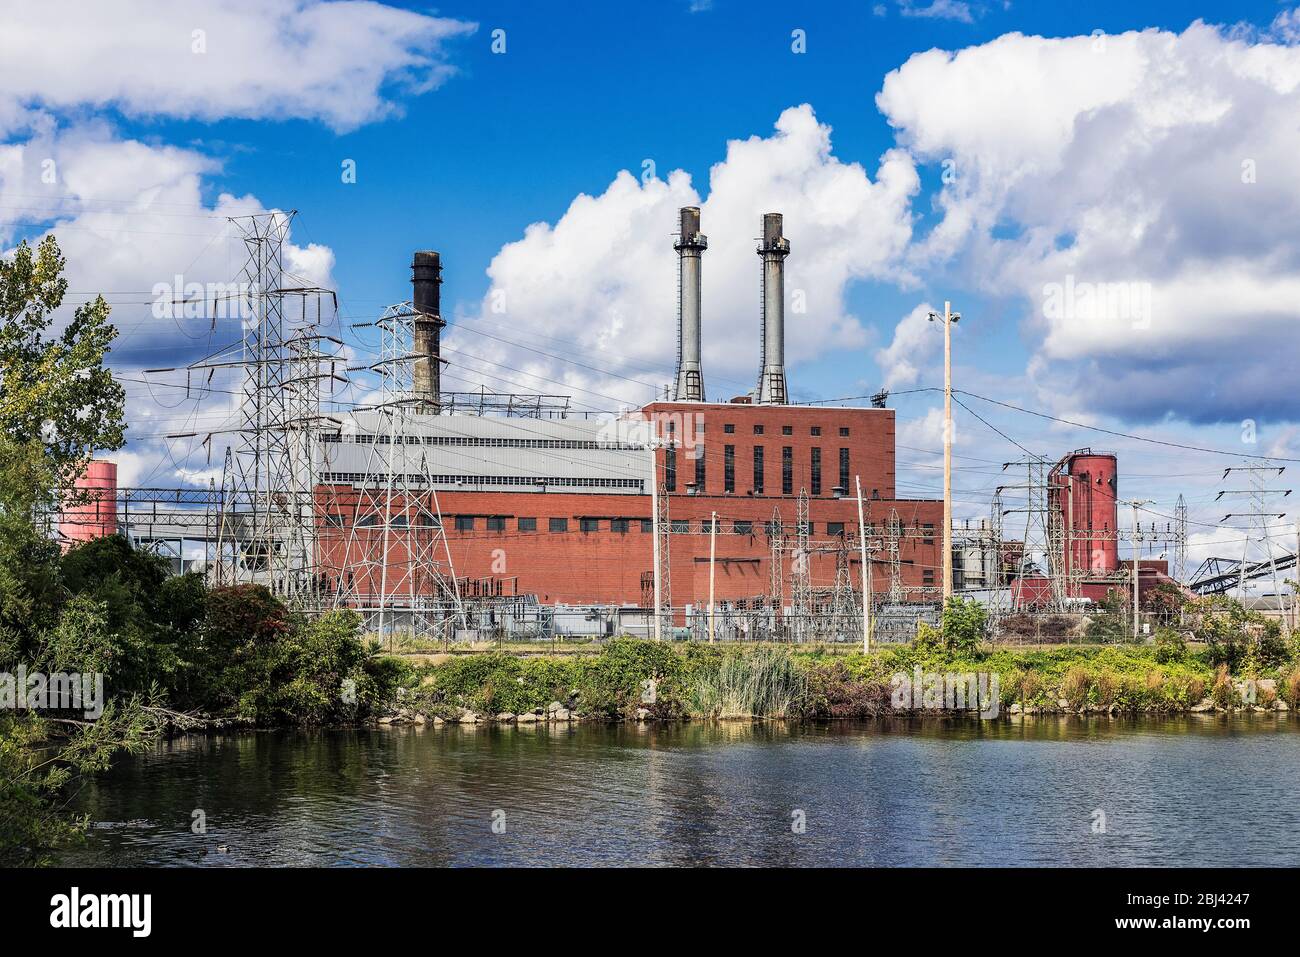 A NRG owned coal fired energy facility that plans to convert to a natural gas facility. Stock Photo